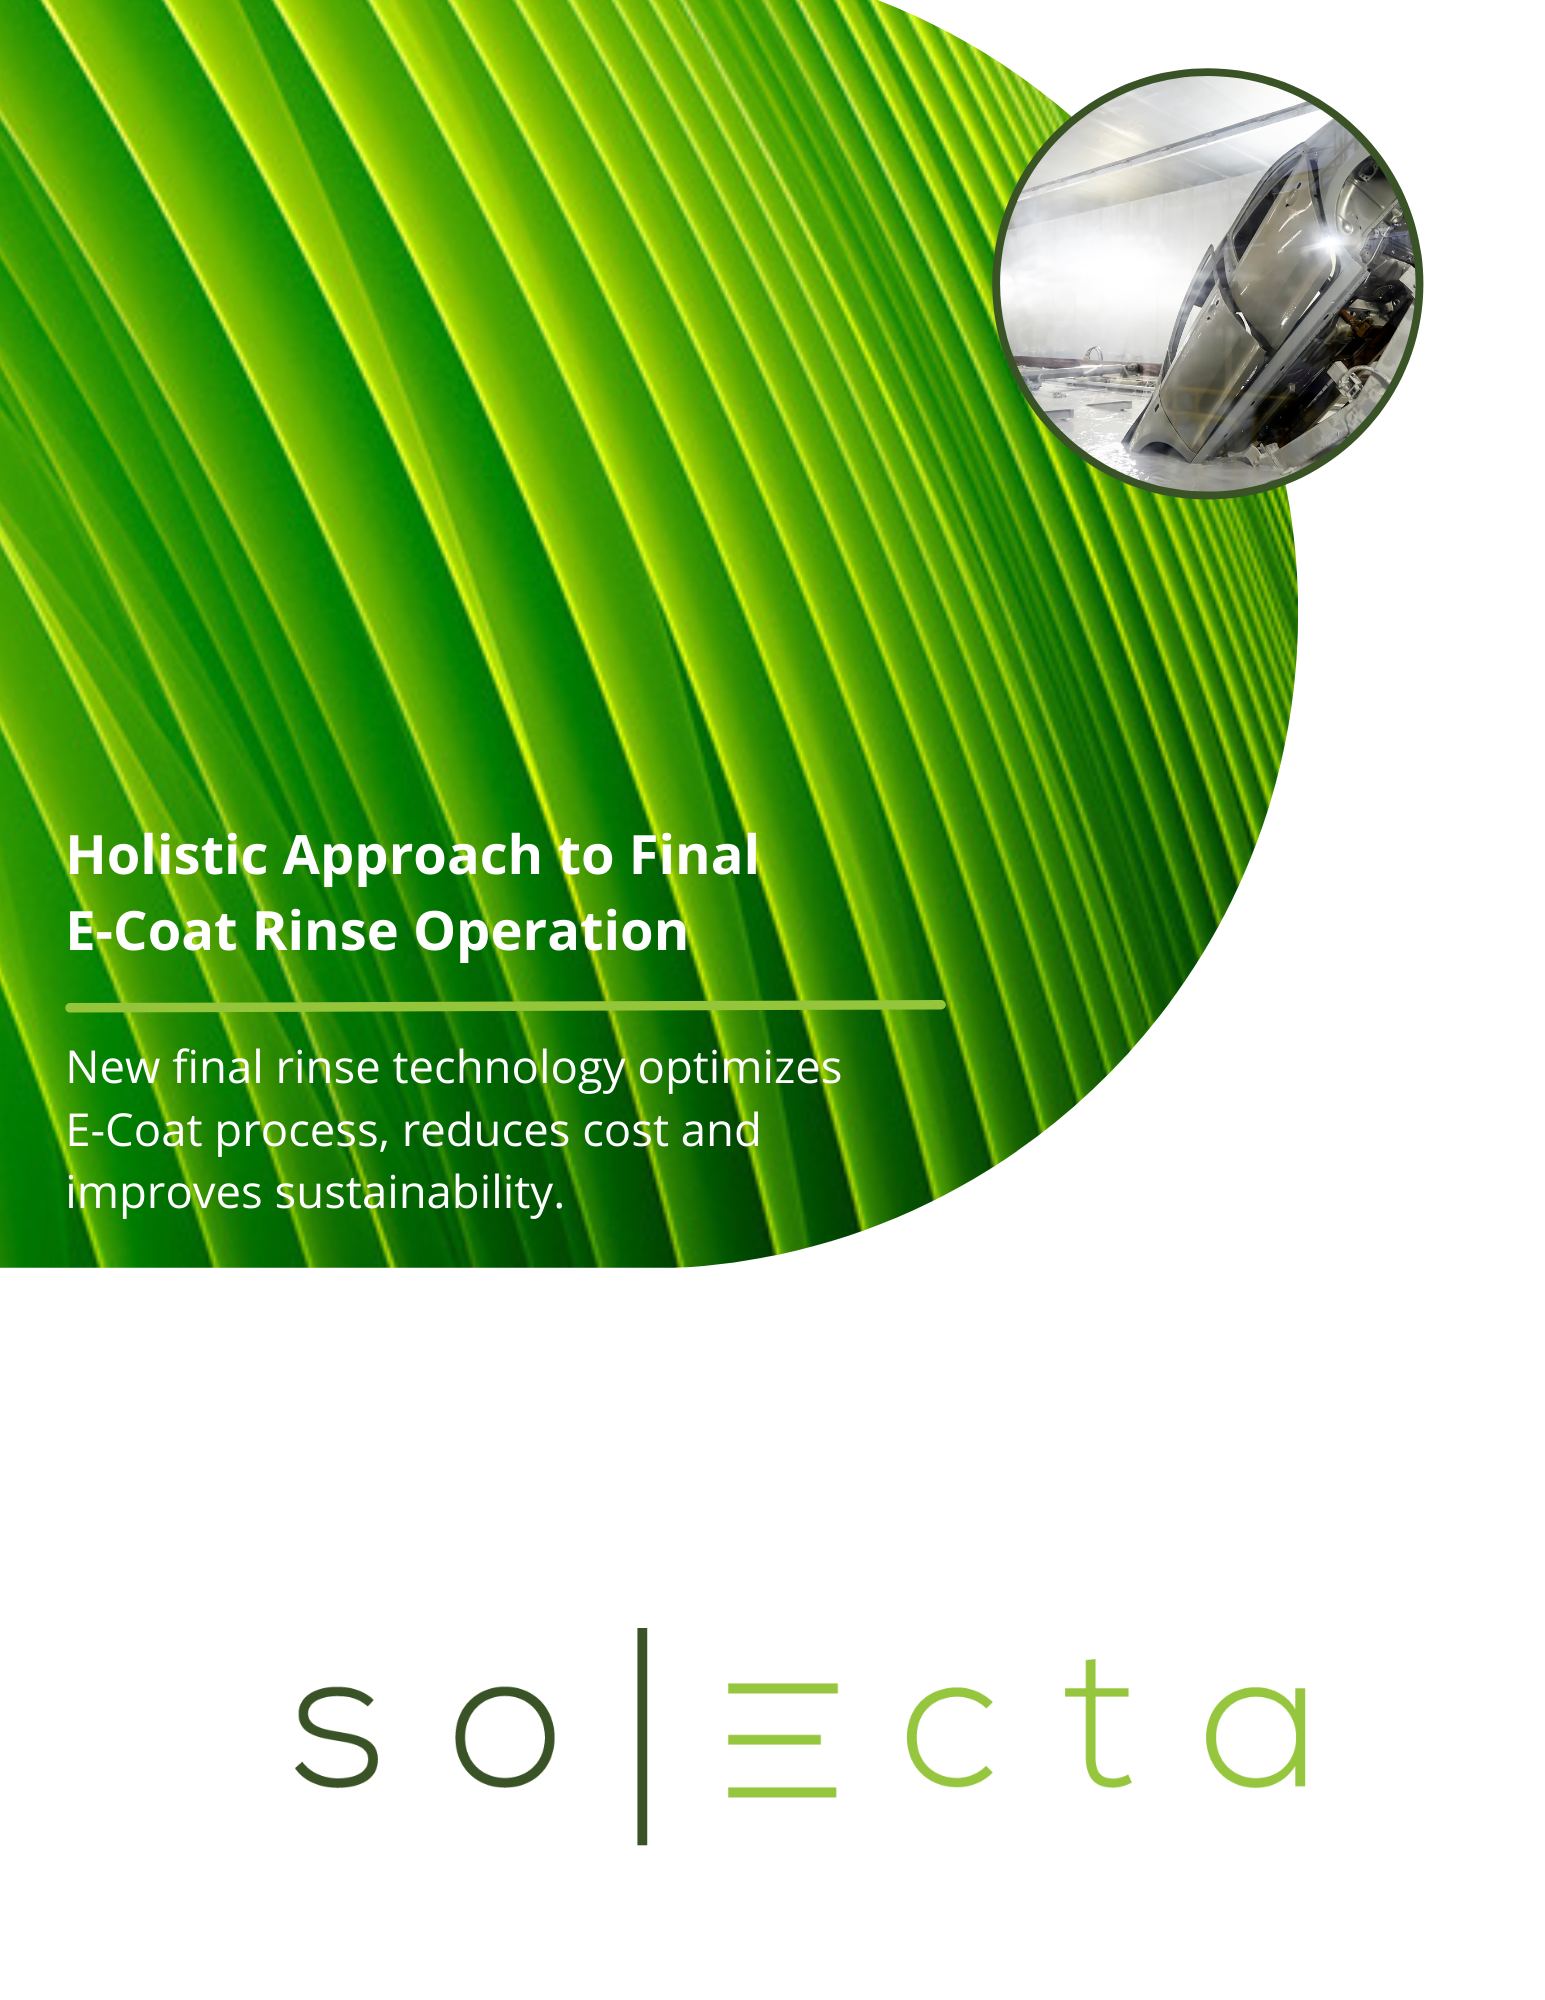 holistic approach to final e-coat rinse operation